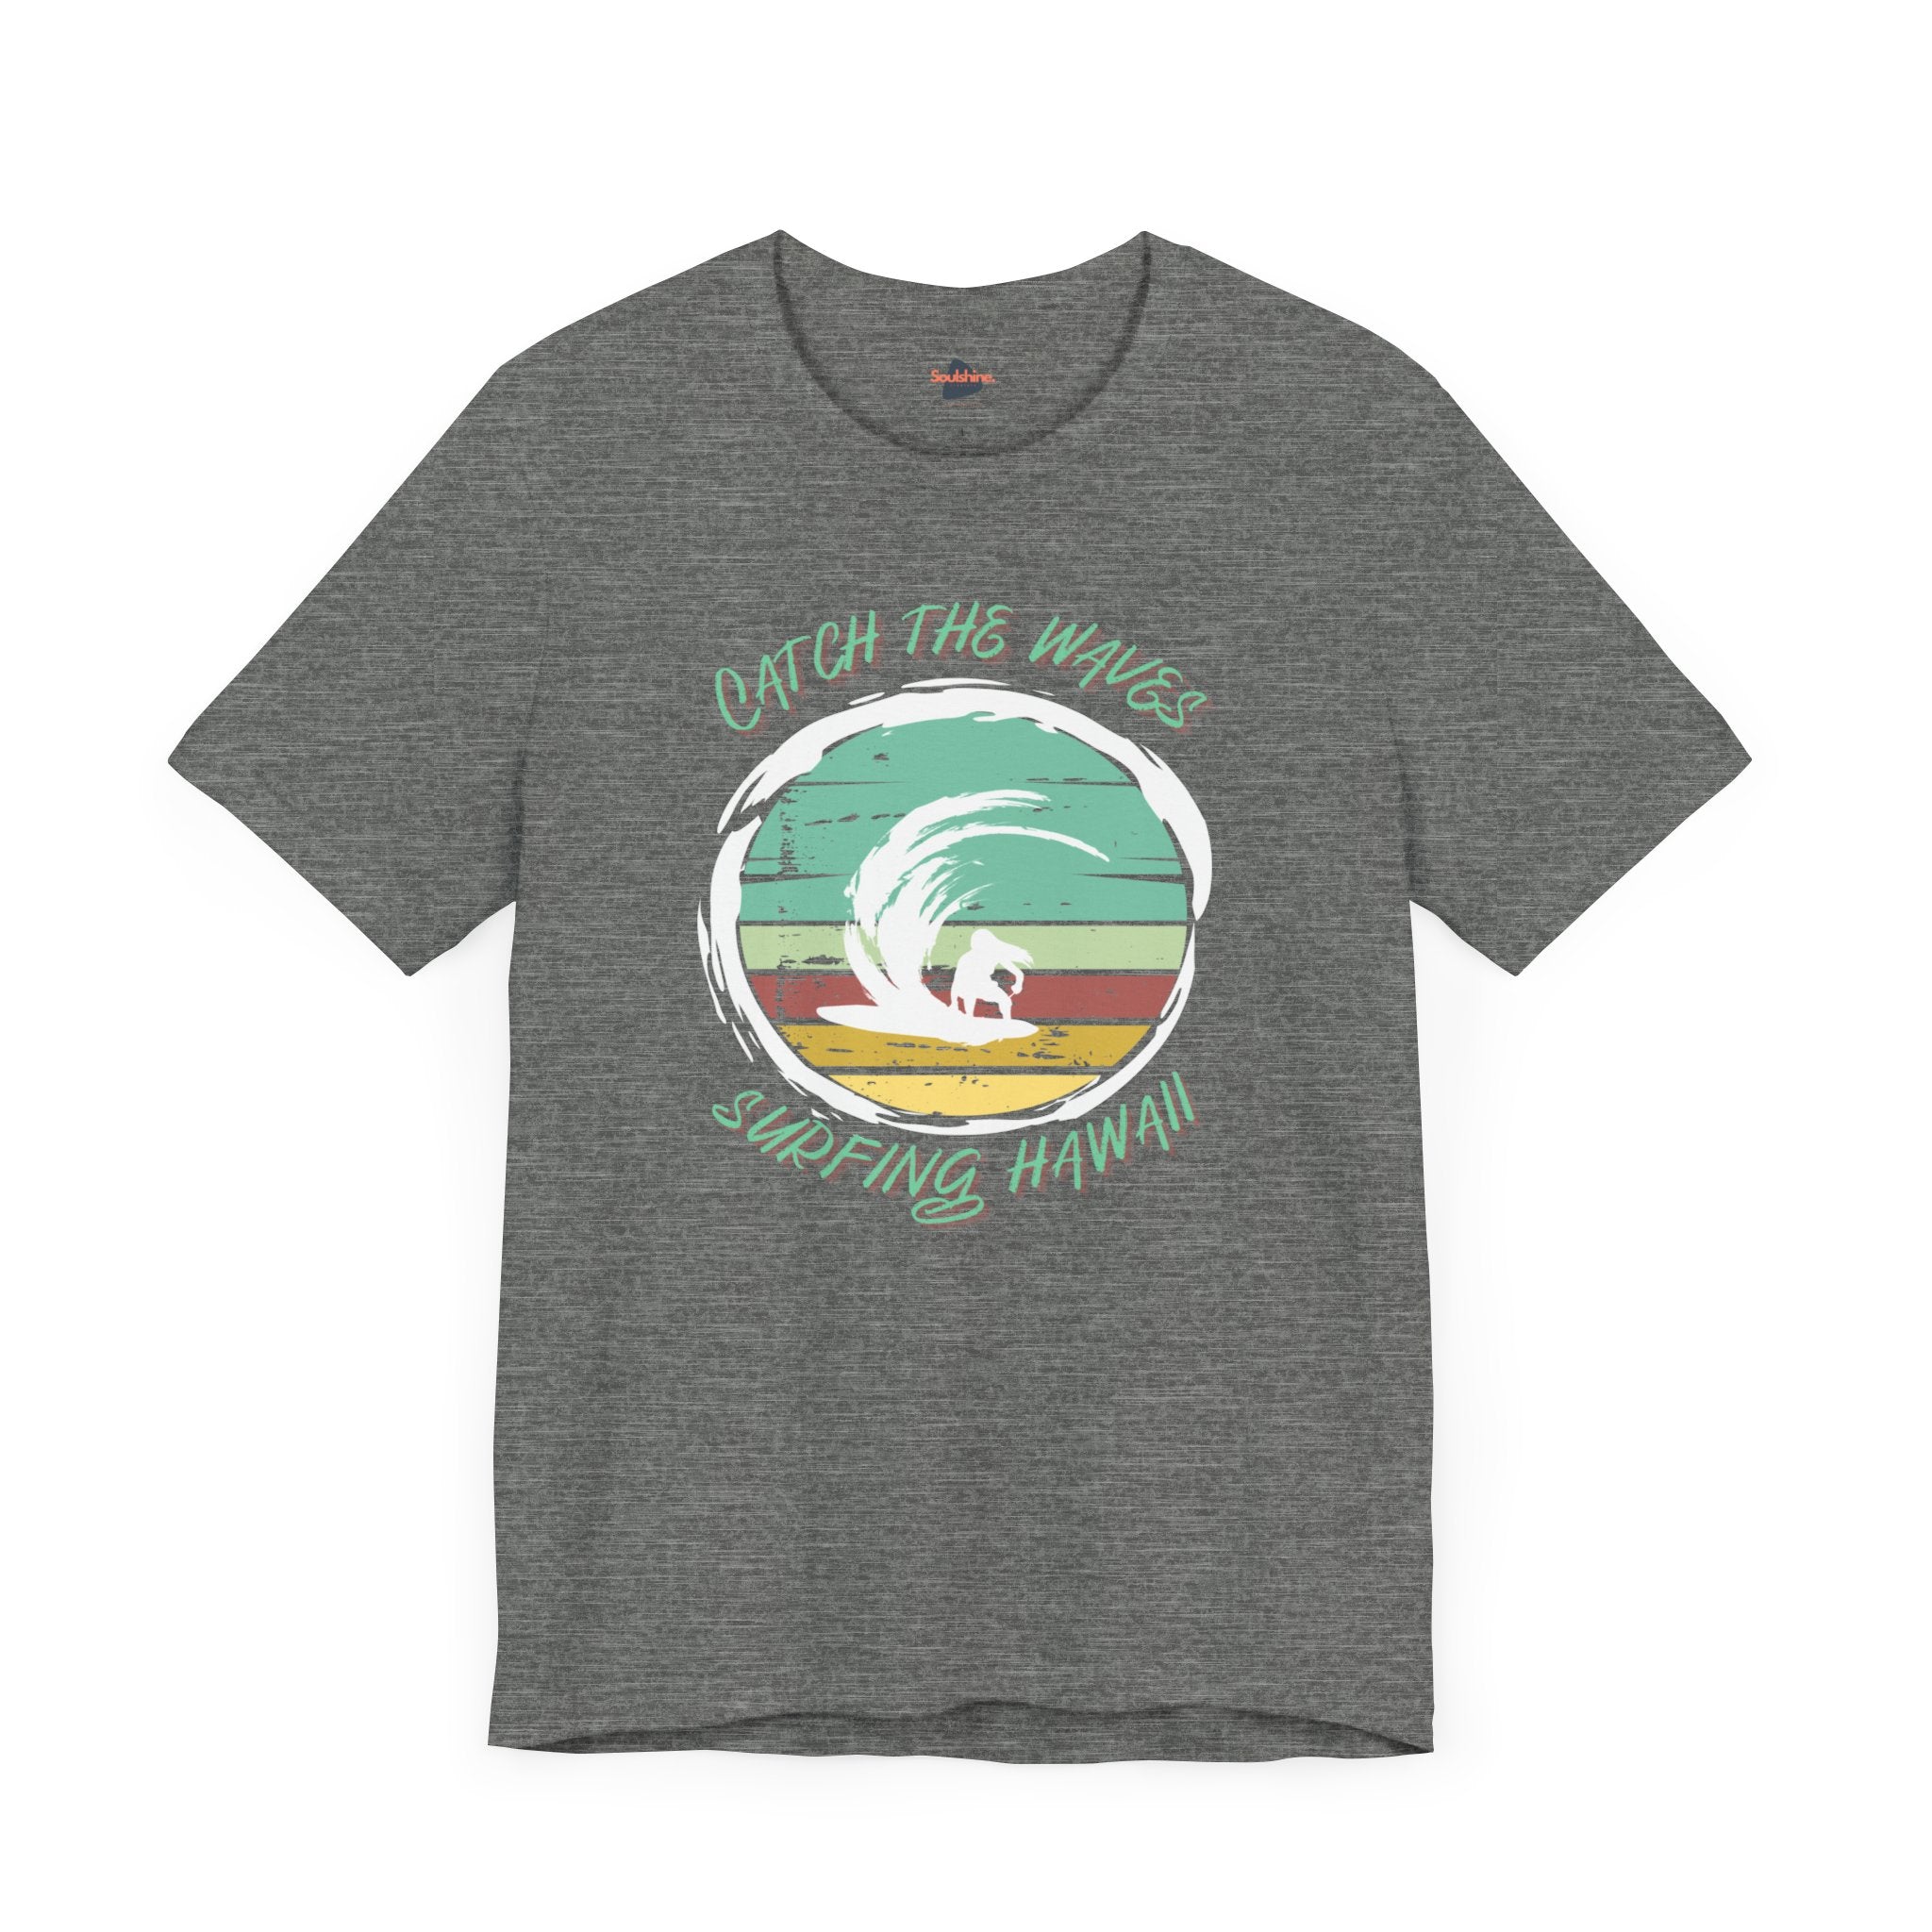 Printed grey surfing t-shirt with surfer riding waves - direct-to-garment item from Soulshinecreators